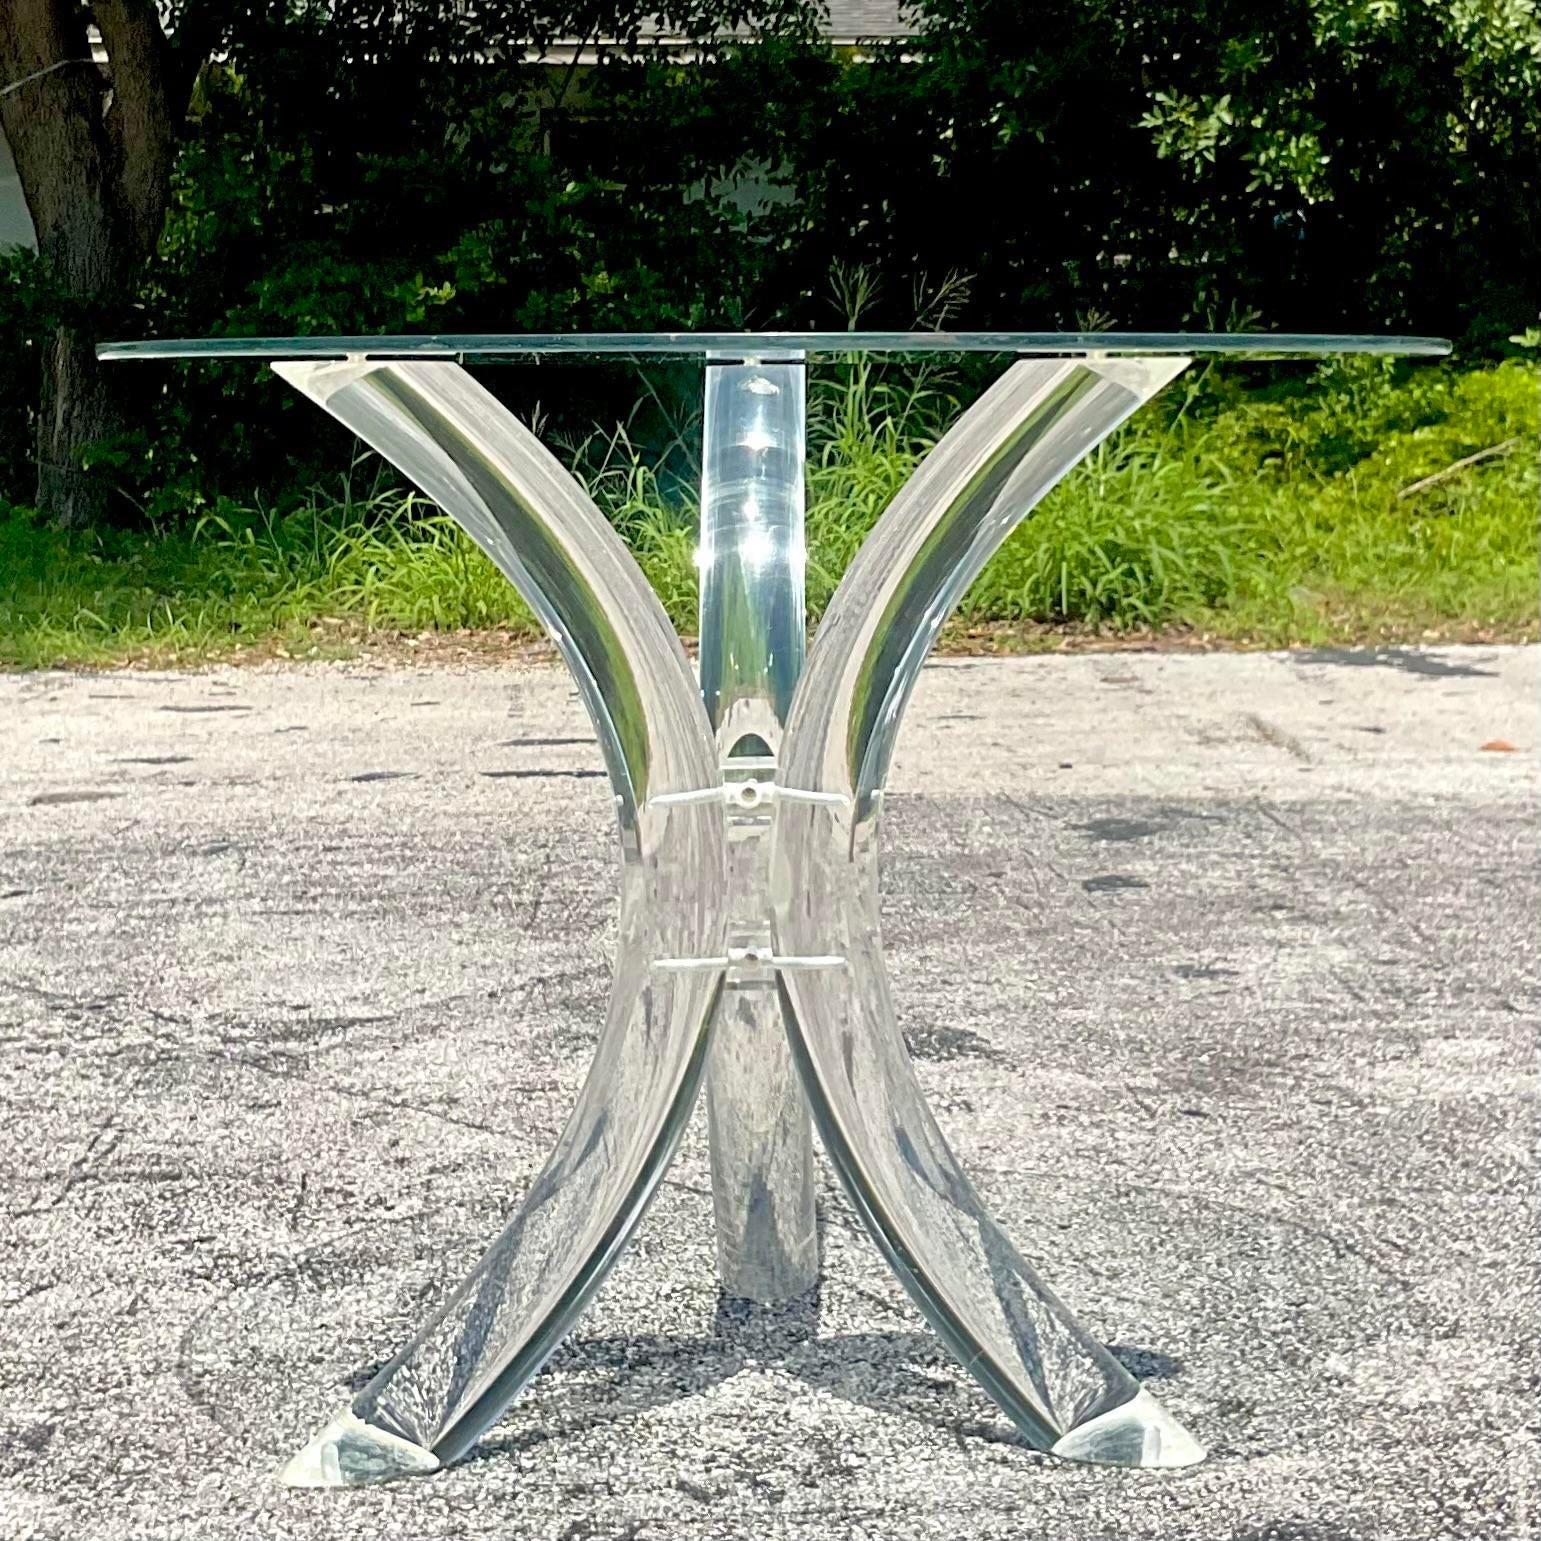 A fabulous vintage Regency center hall table. A chic lucite tripod shape with a glass top. Can easily support a larger piece of glass. Two tables available if a pair is needed. Acquired from a Palm Beach estate.